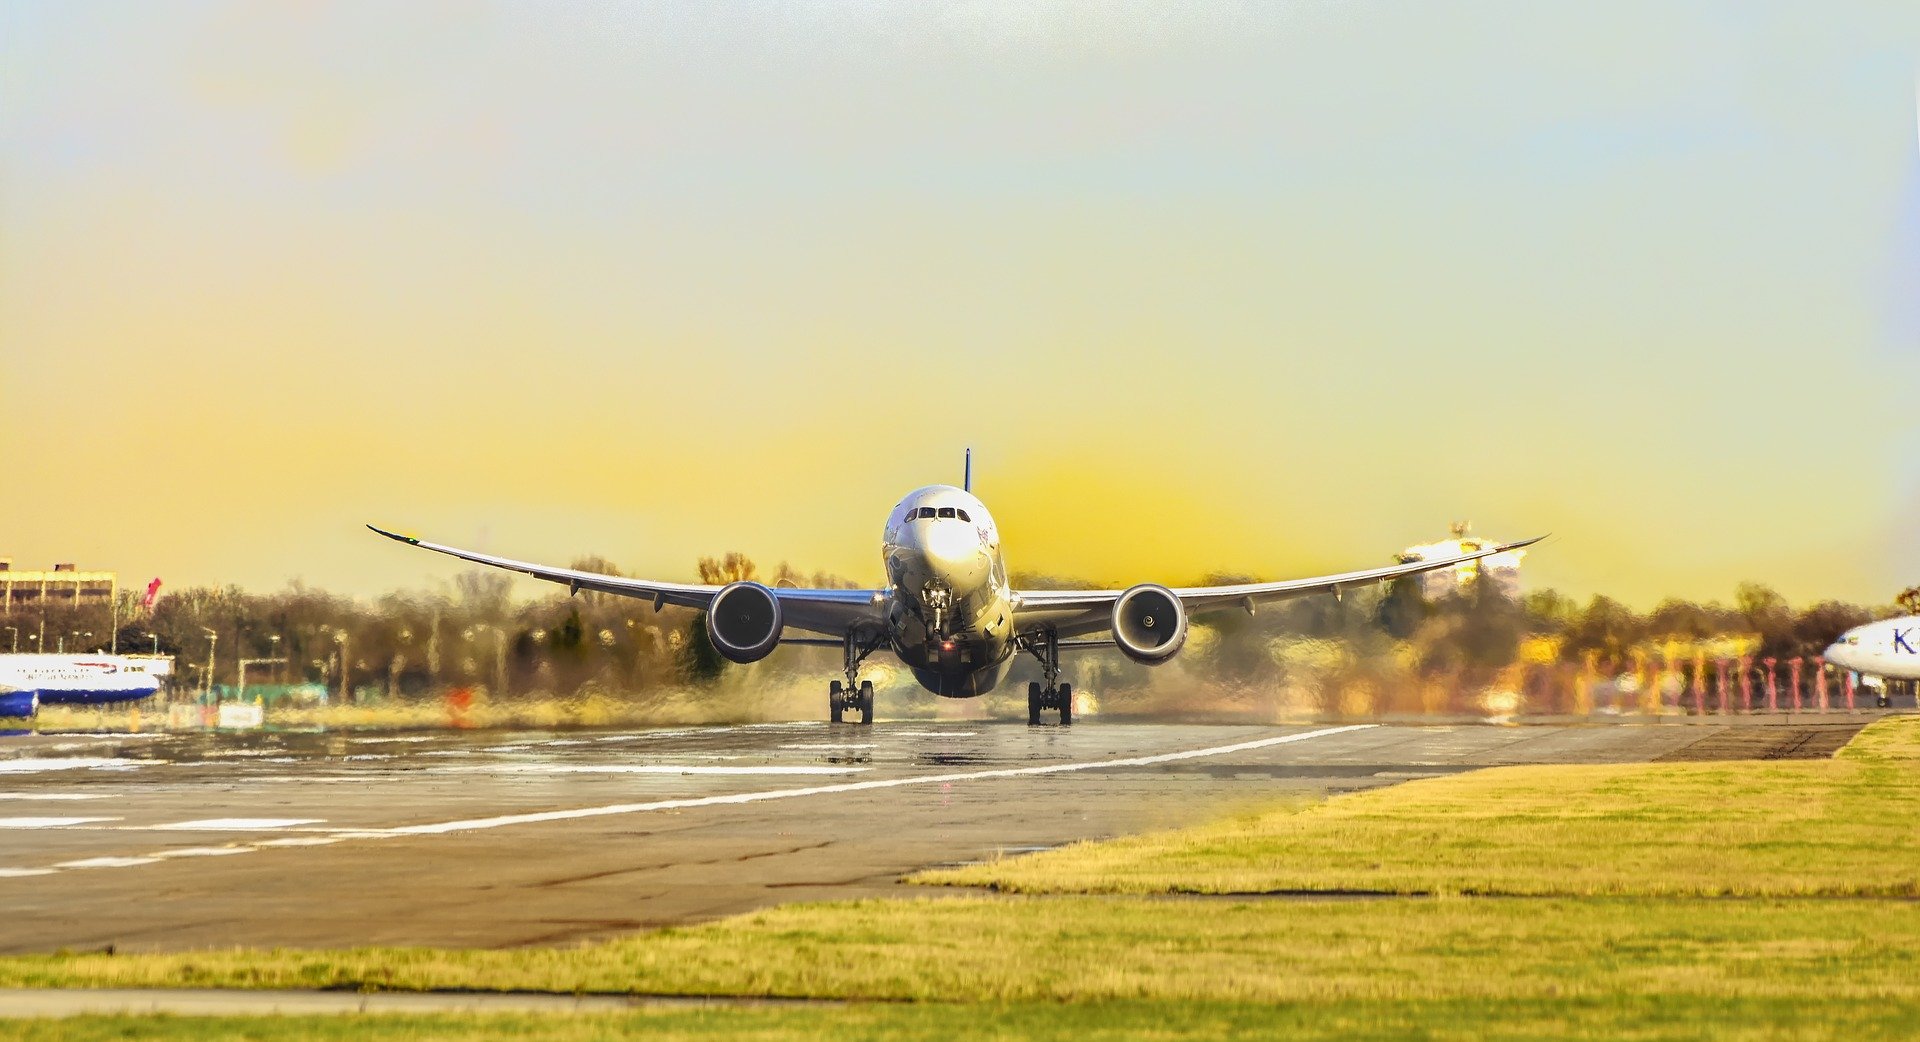 aircraft take off - Image by Bilal EL-Daou from Pixabay